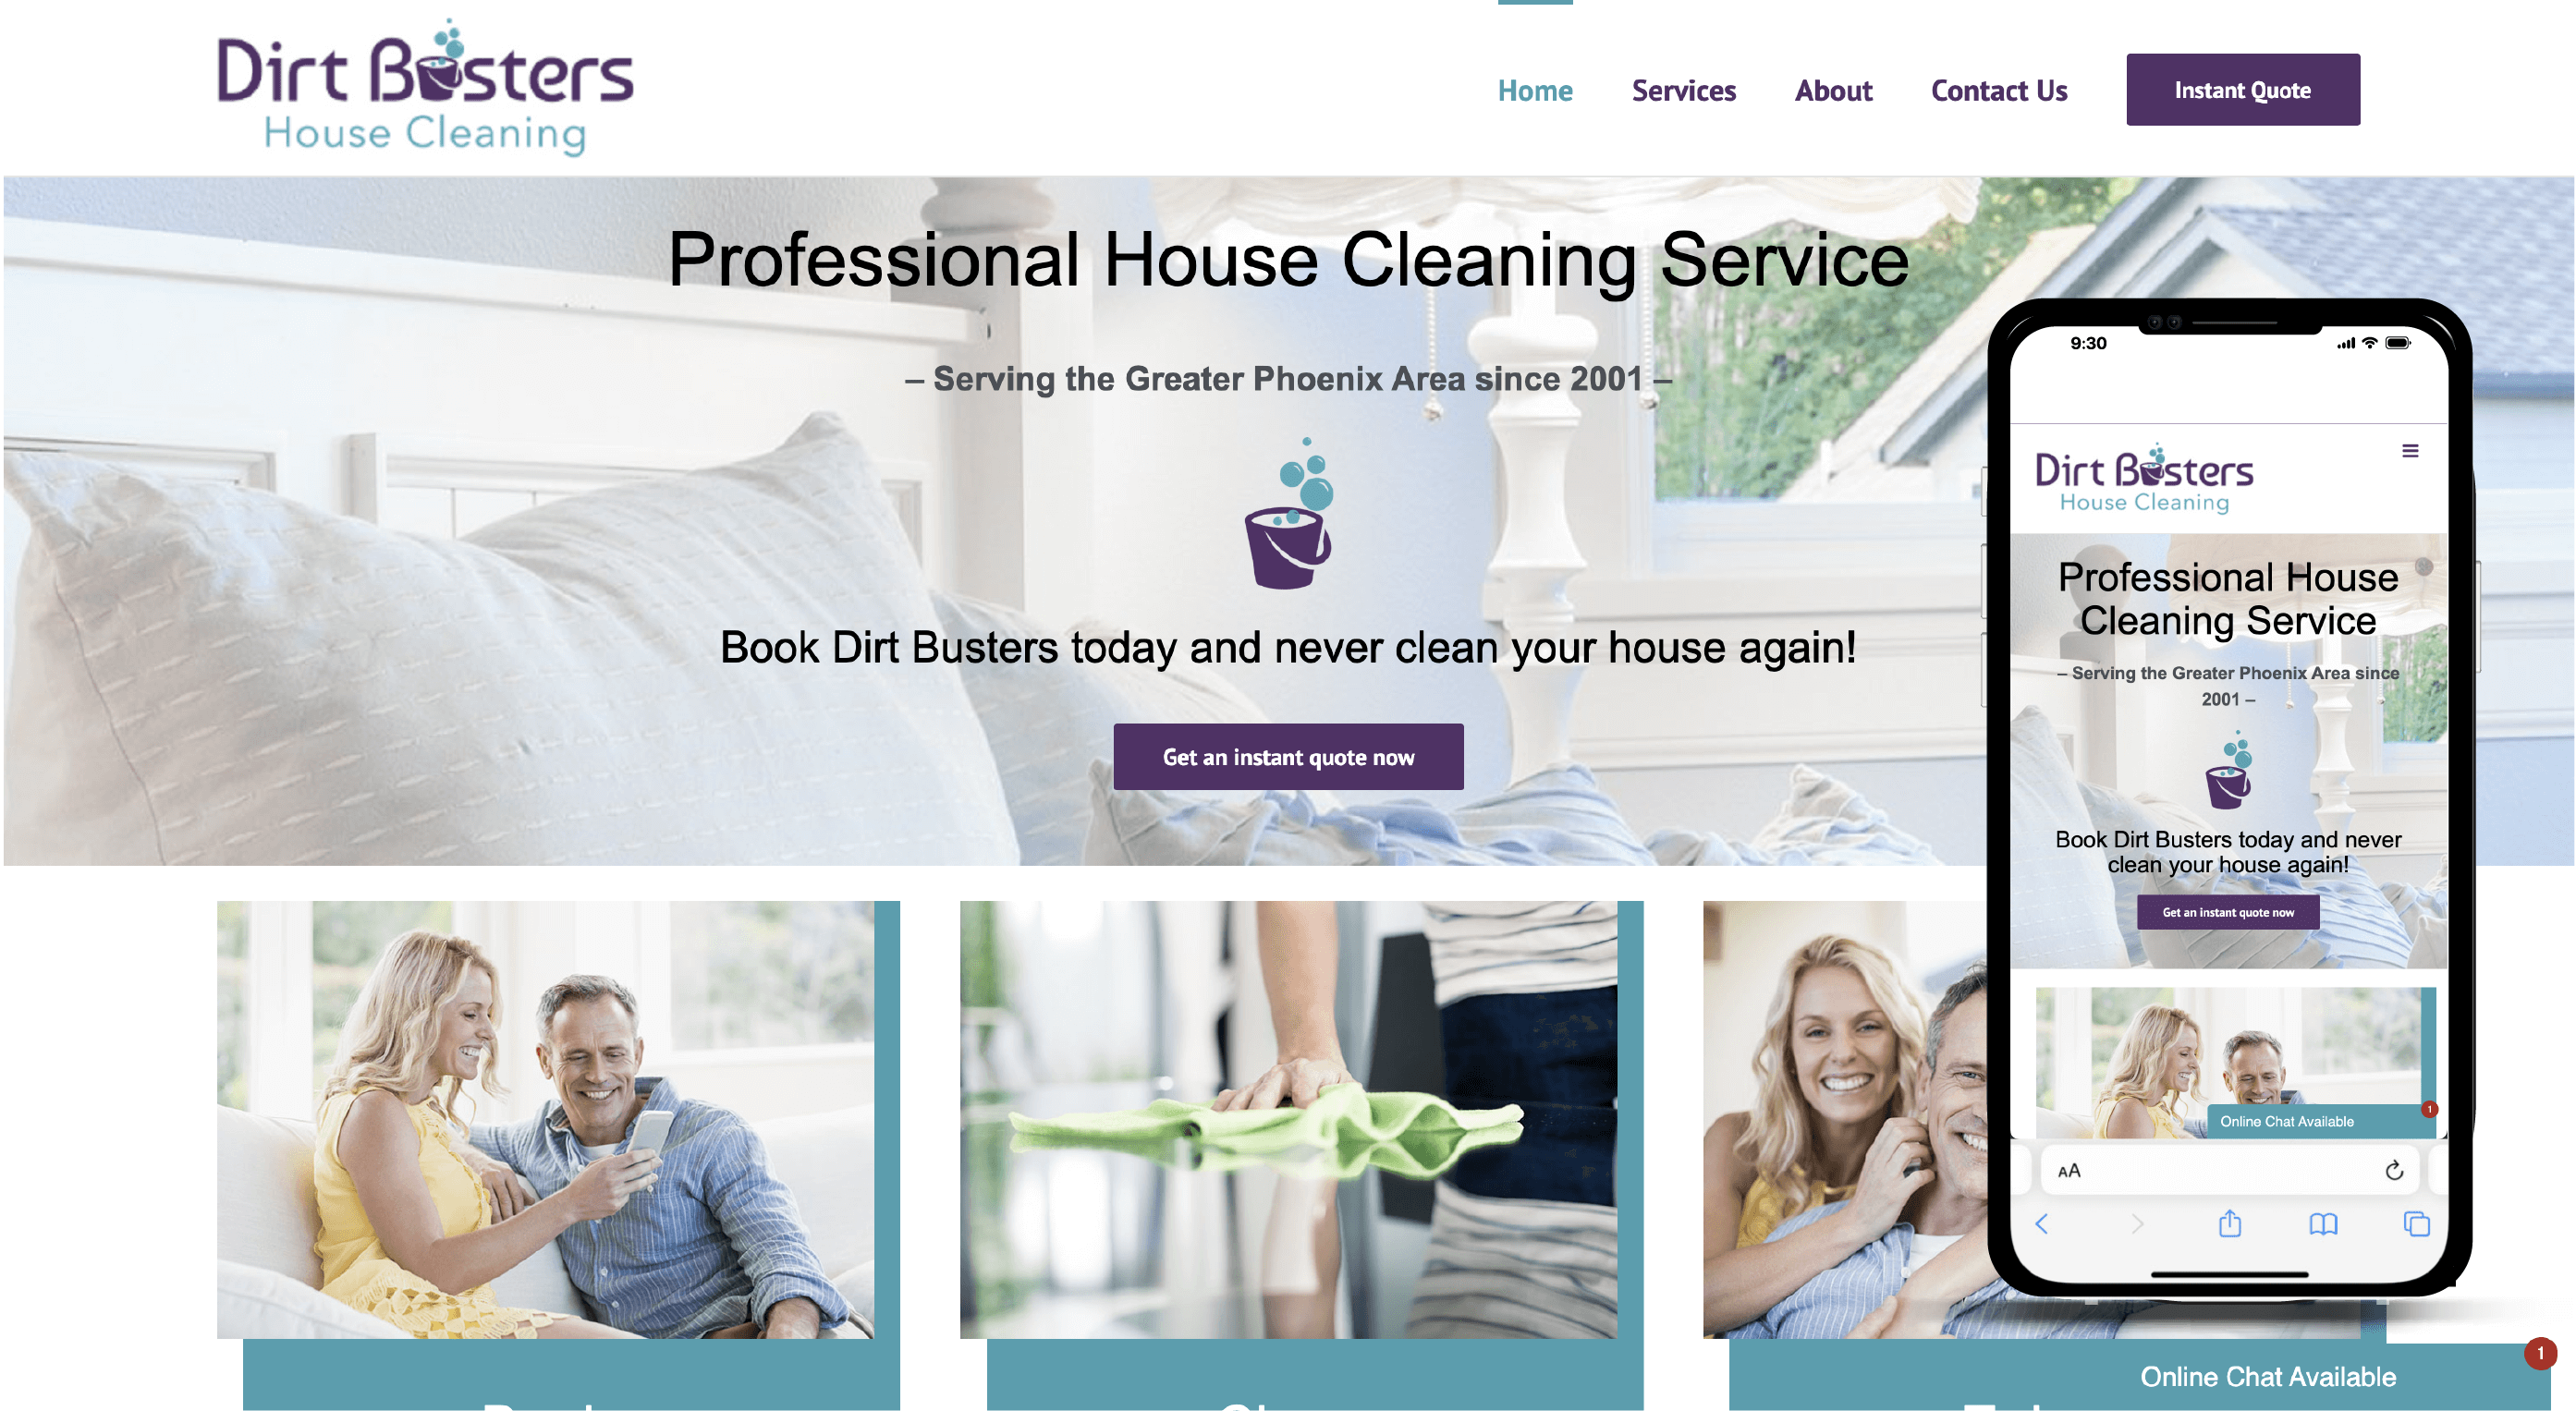 https://marketingforcleaners.com/wp-content/uploads/2018/05/mobile.png